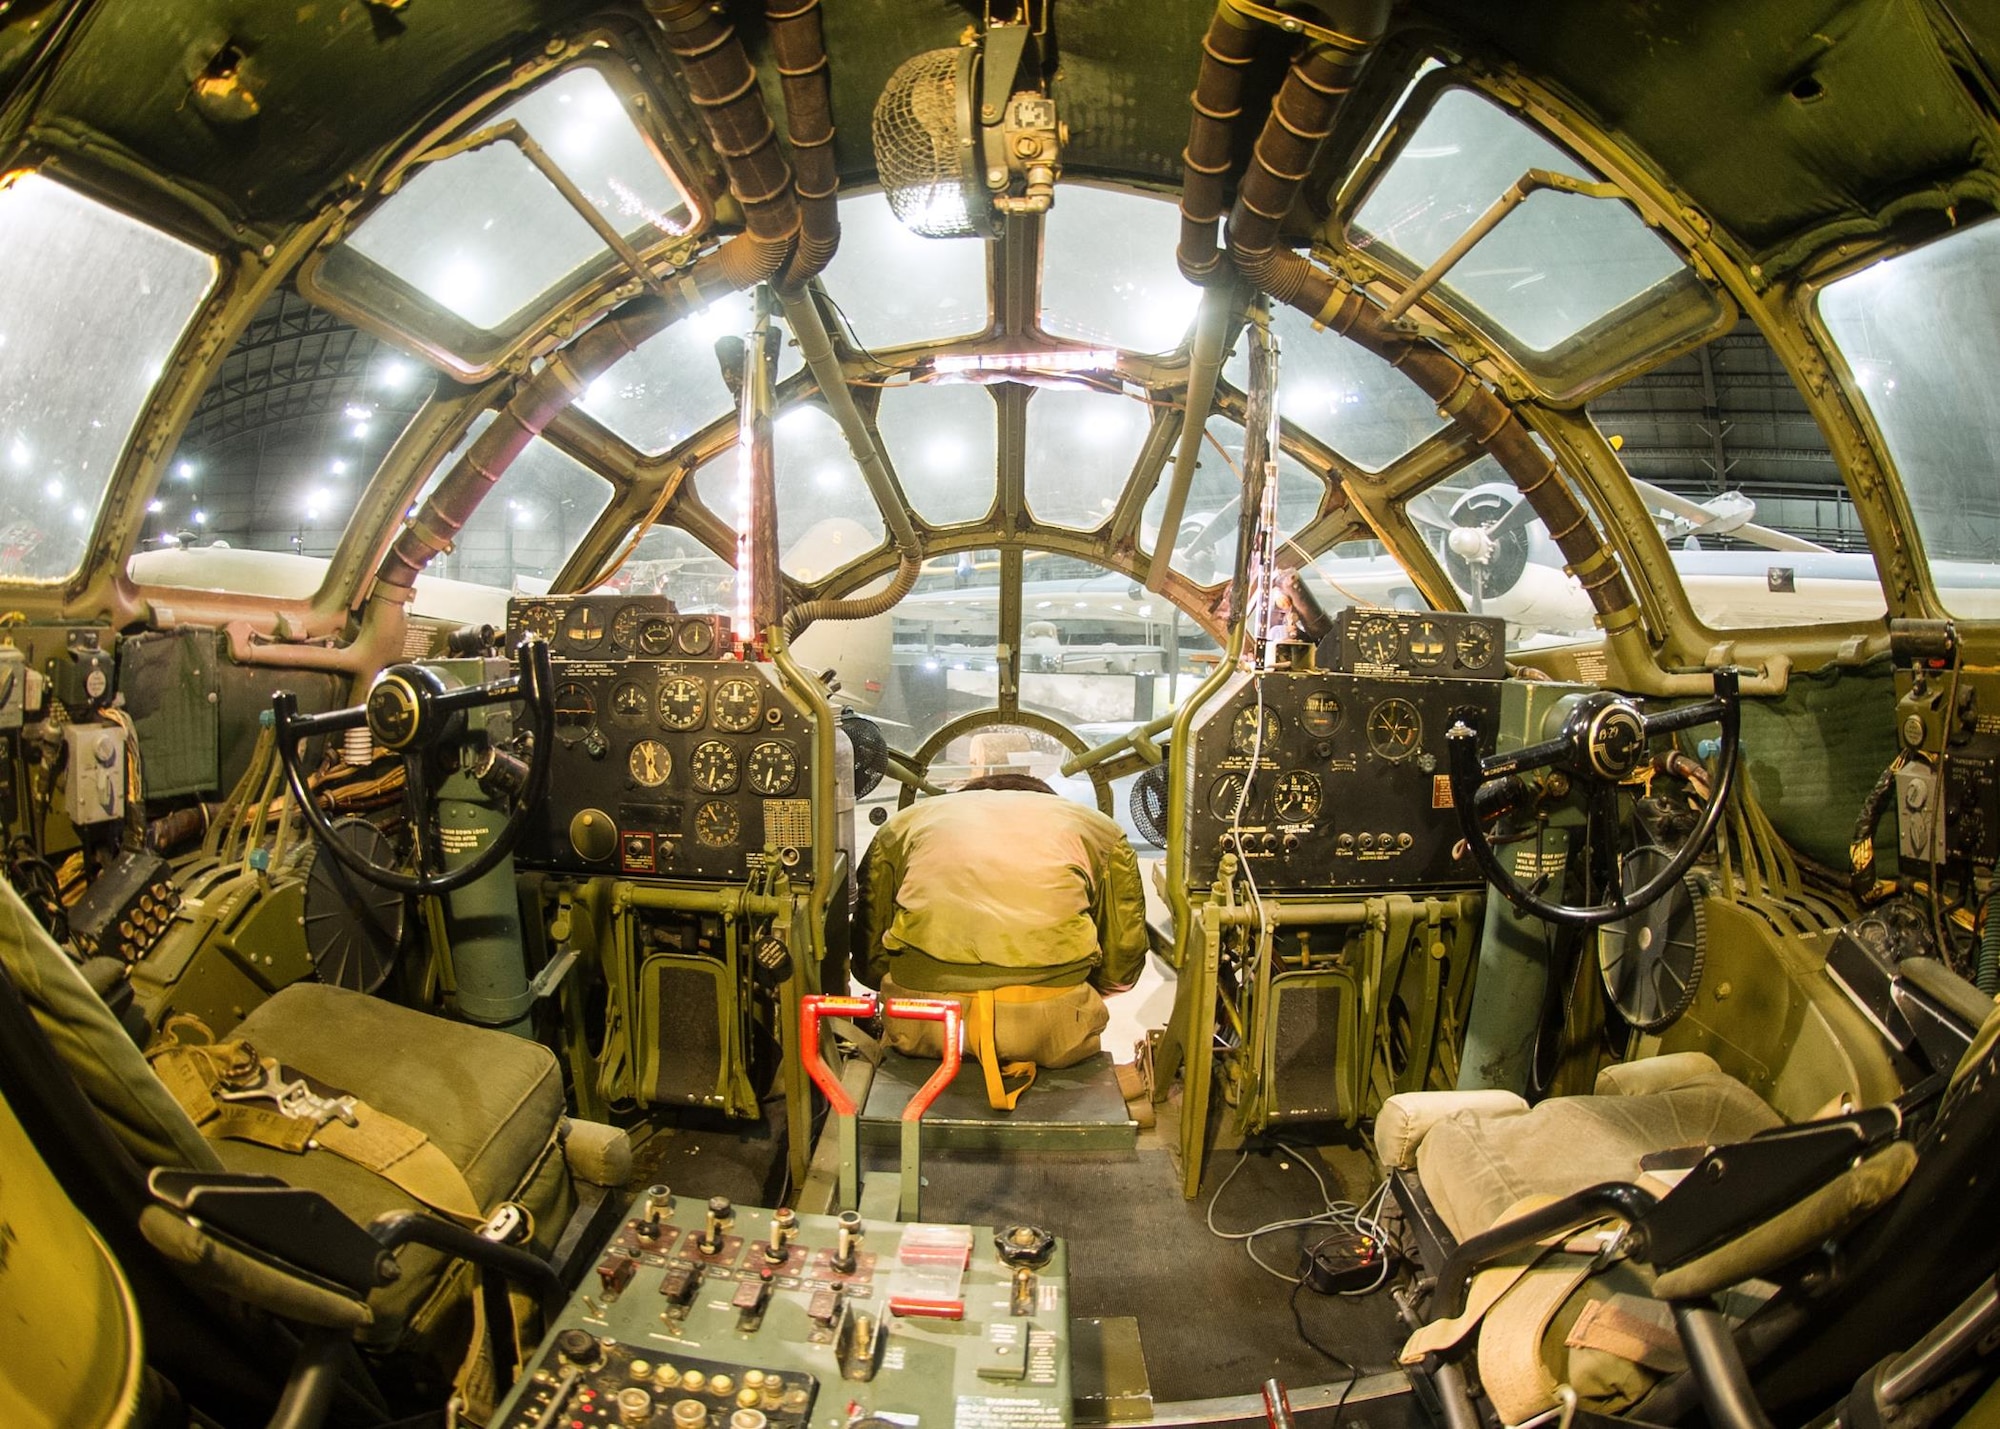 DAYTON, Ohio - Boeing B-29 Superfortress "Bockscar" interior view of the cockpit in the WWII Gallery at the National Museum of the U.S. Air Force. (U.S. Air Force photo)